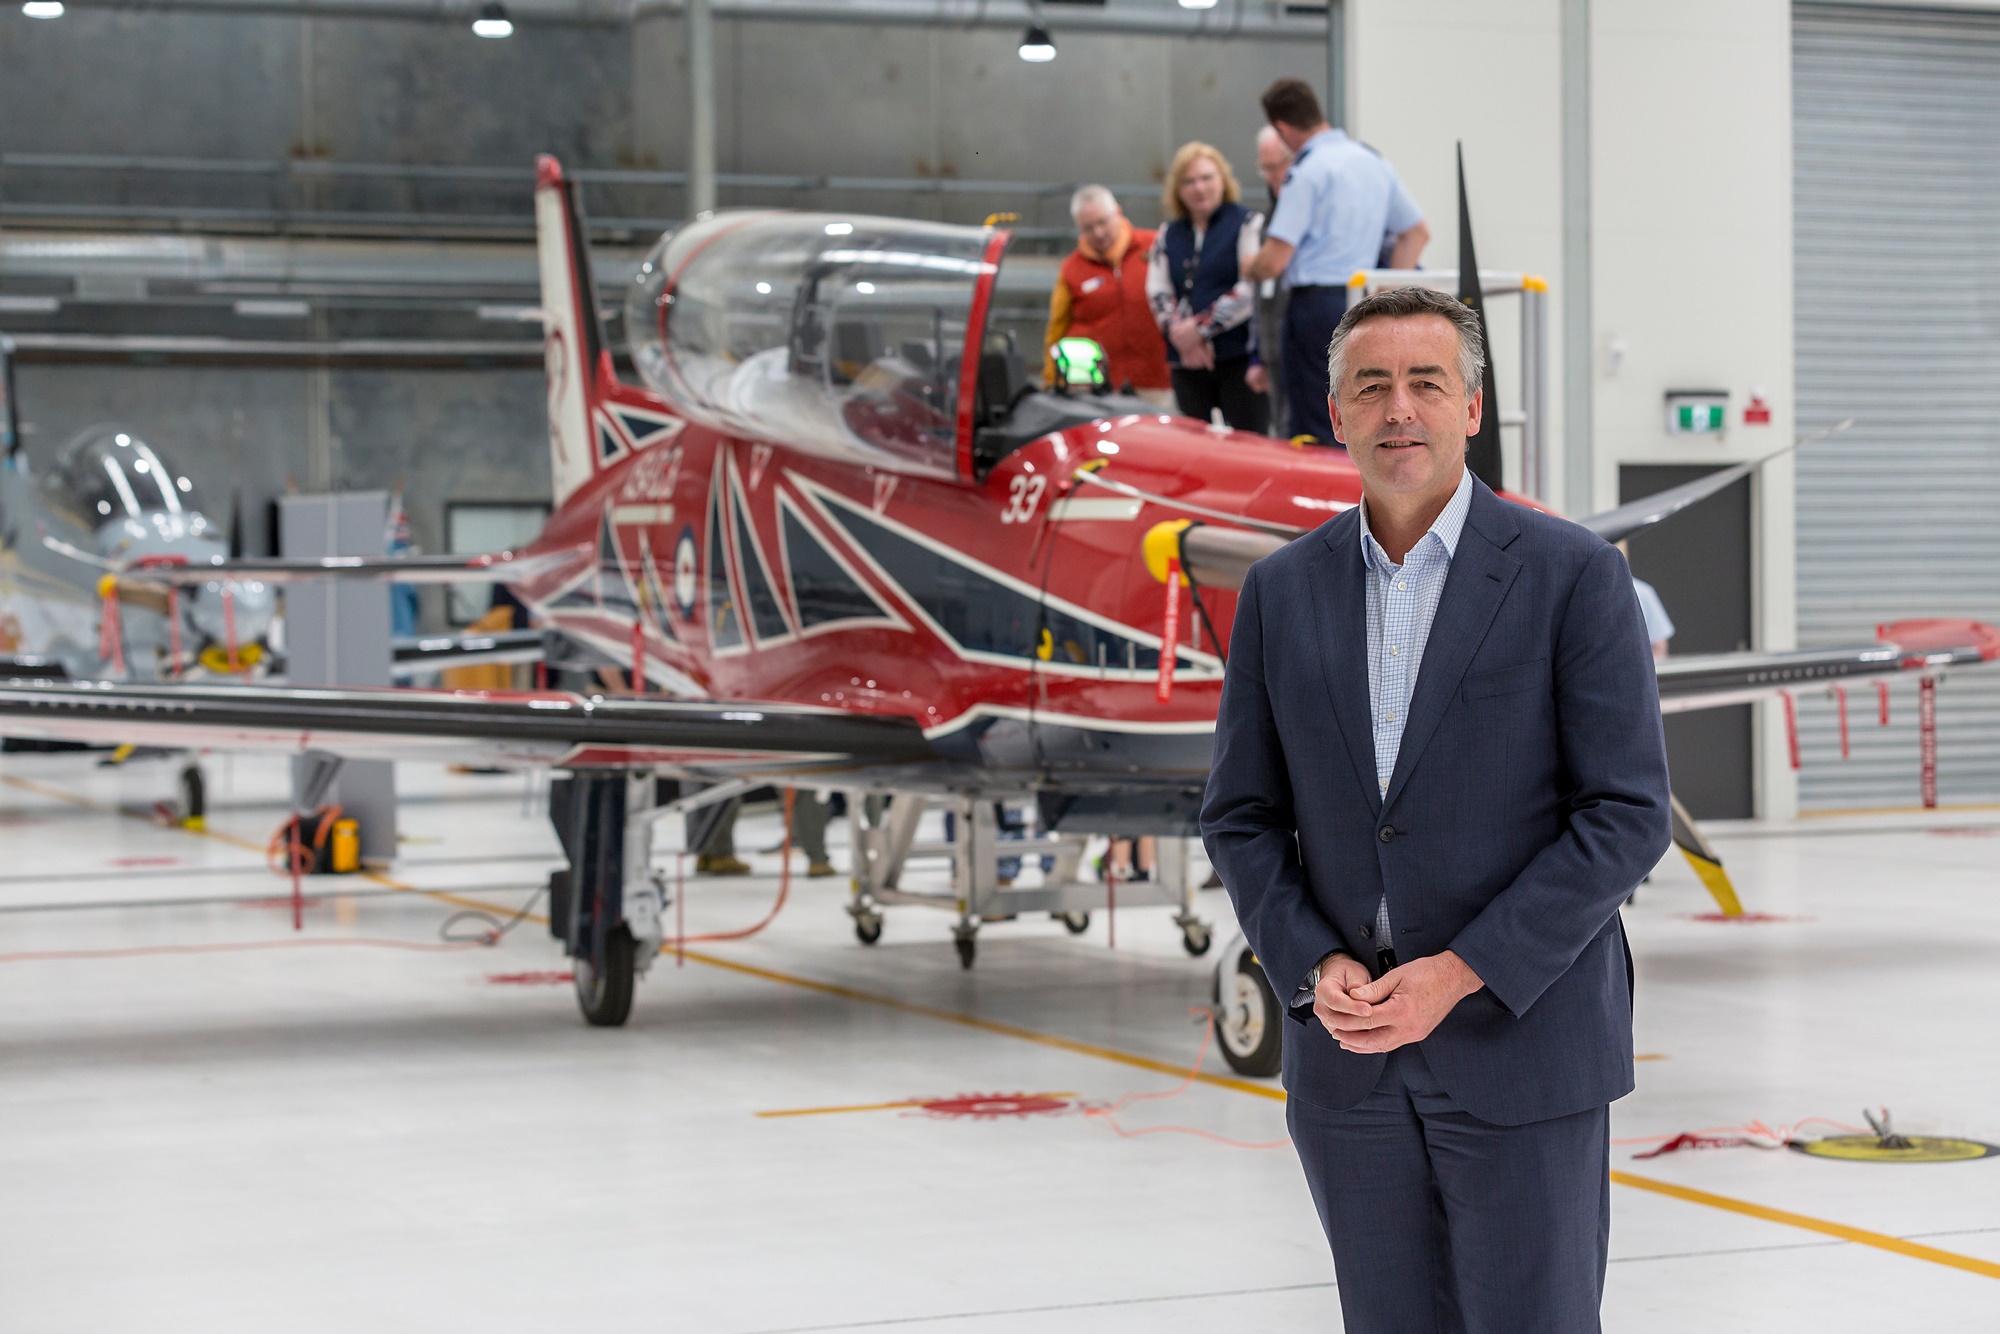 Minister for Veterans and Defence Personnel, the Hon. Darren Chester MP in front of a new RAAF Pilatus PC-21 during the final delivery ceremony at RAAF Base East Sale. 